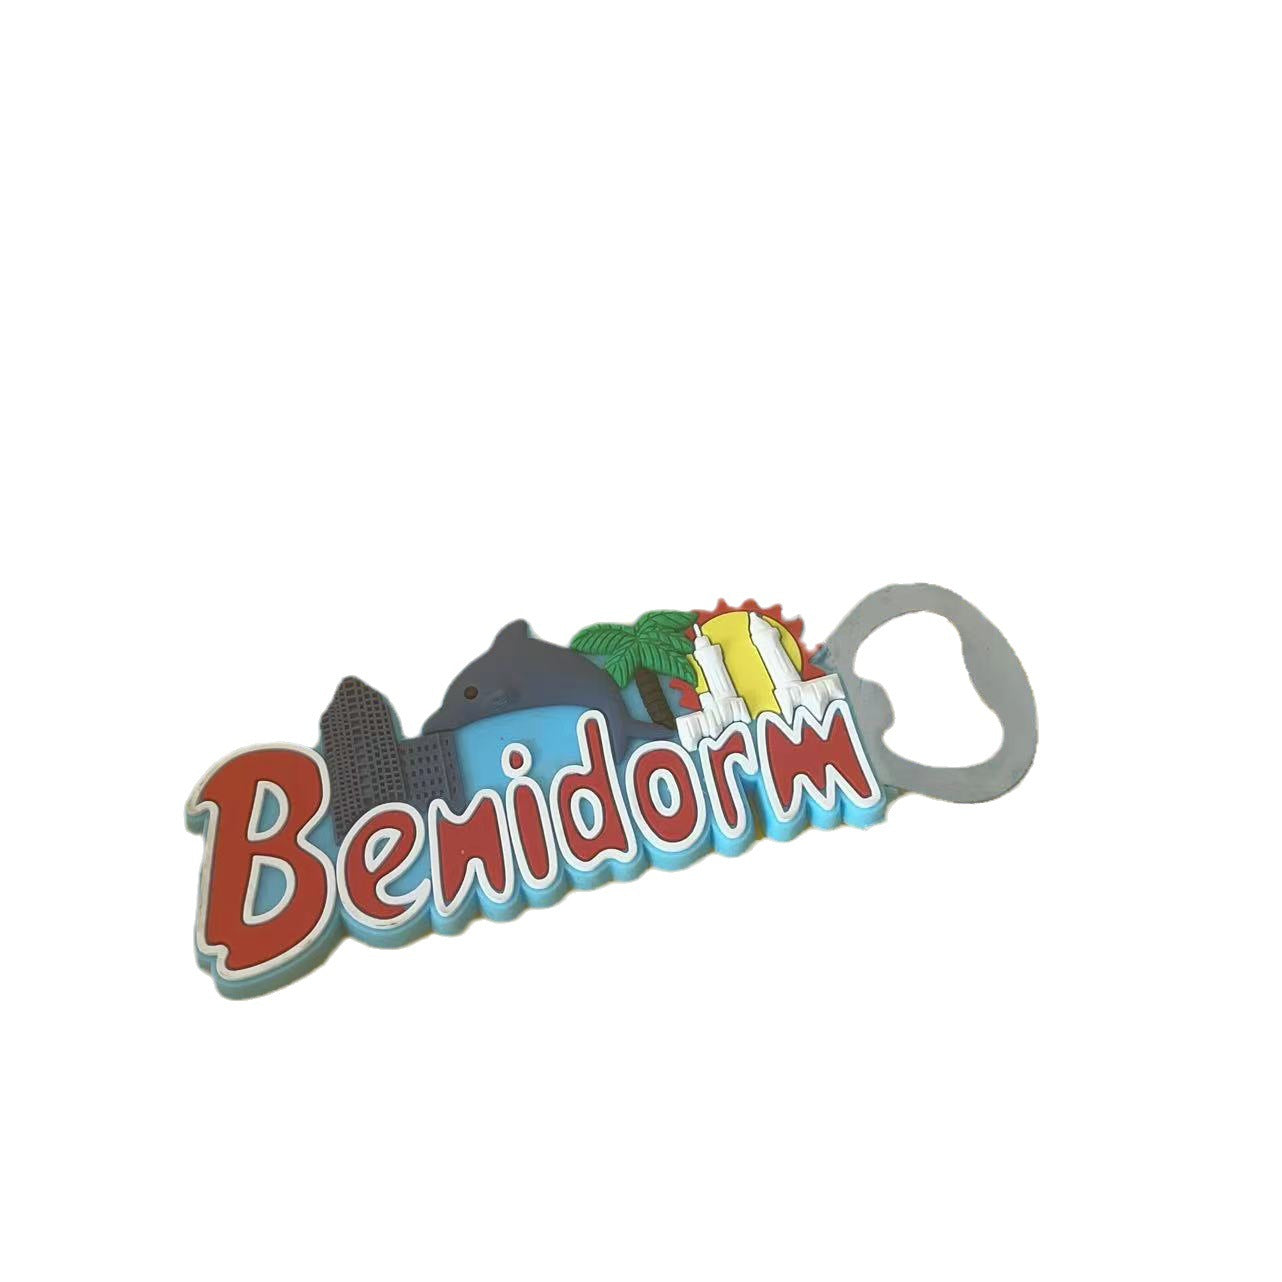 A keychain bottle opener with 'Benidorm' engraved, perfect for opening bottles on the go- yourstuffmade